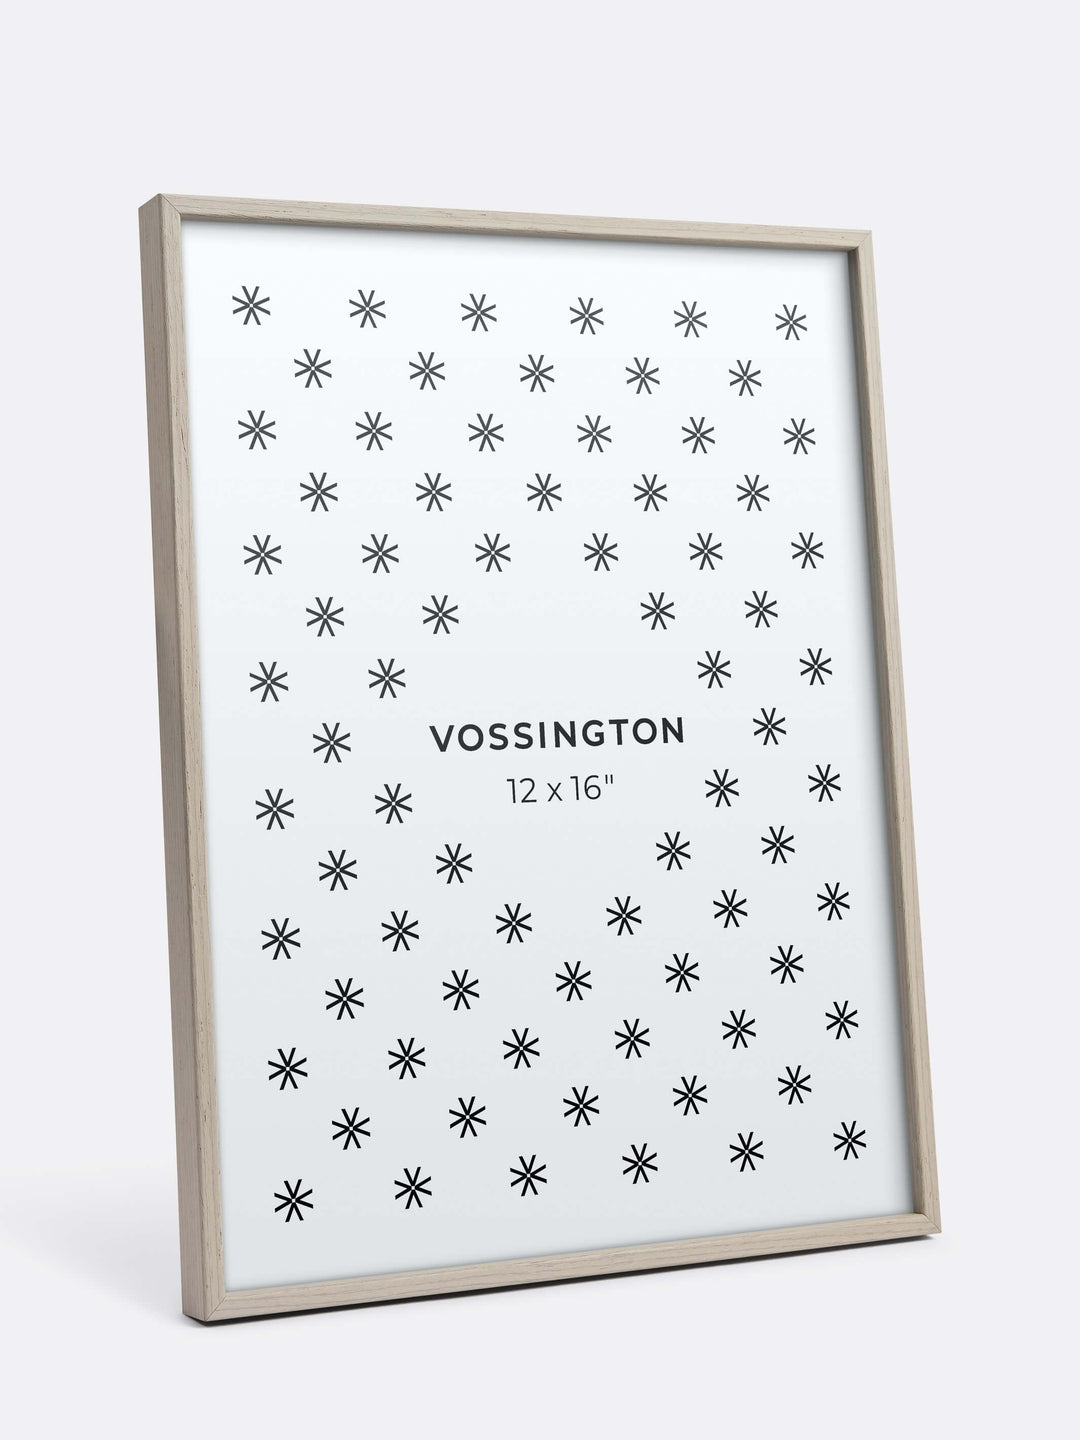 12x16 Frame - Exclusive White Wood Picture Frame From Vossington